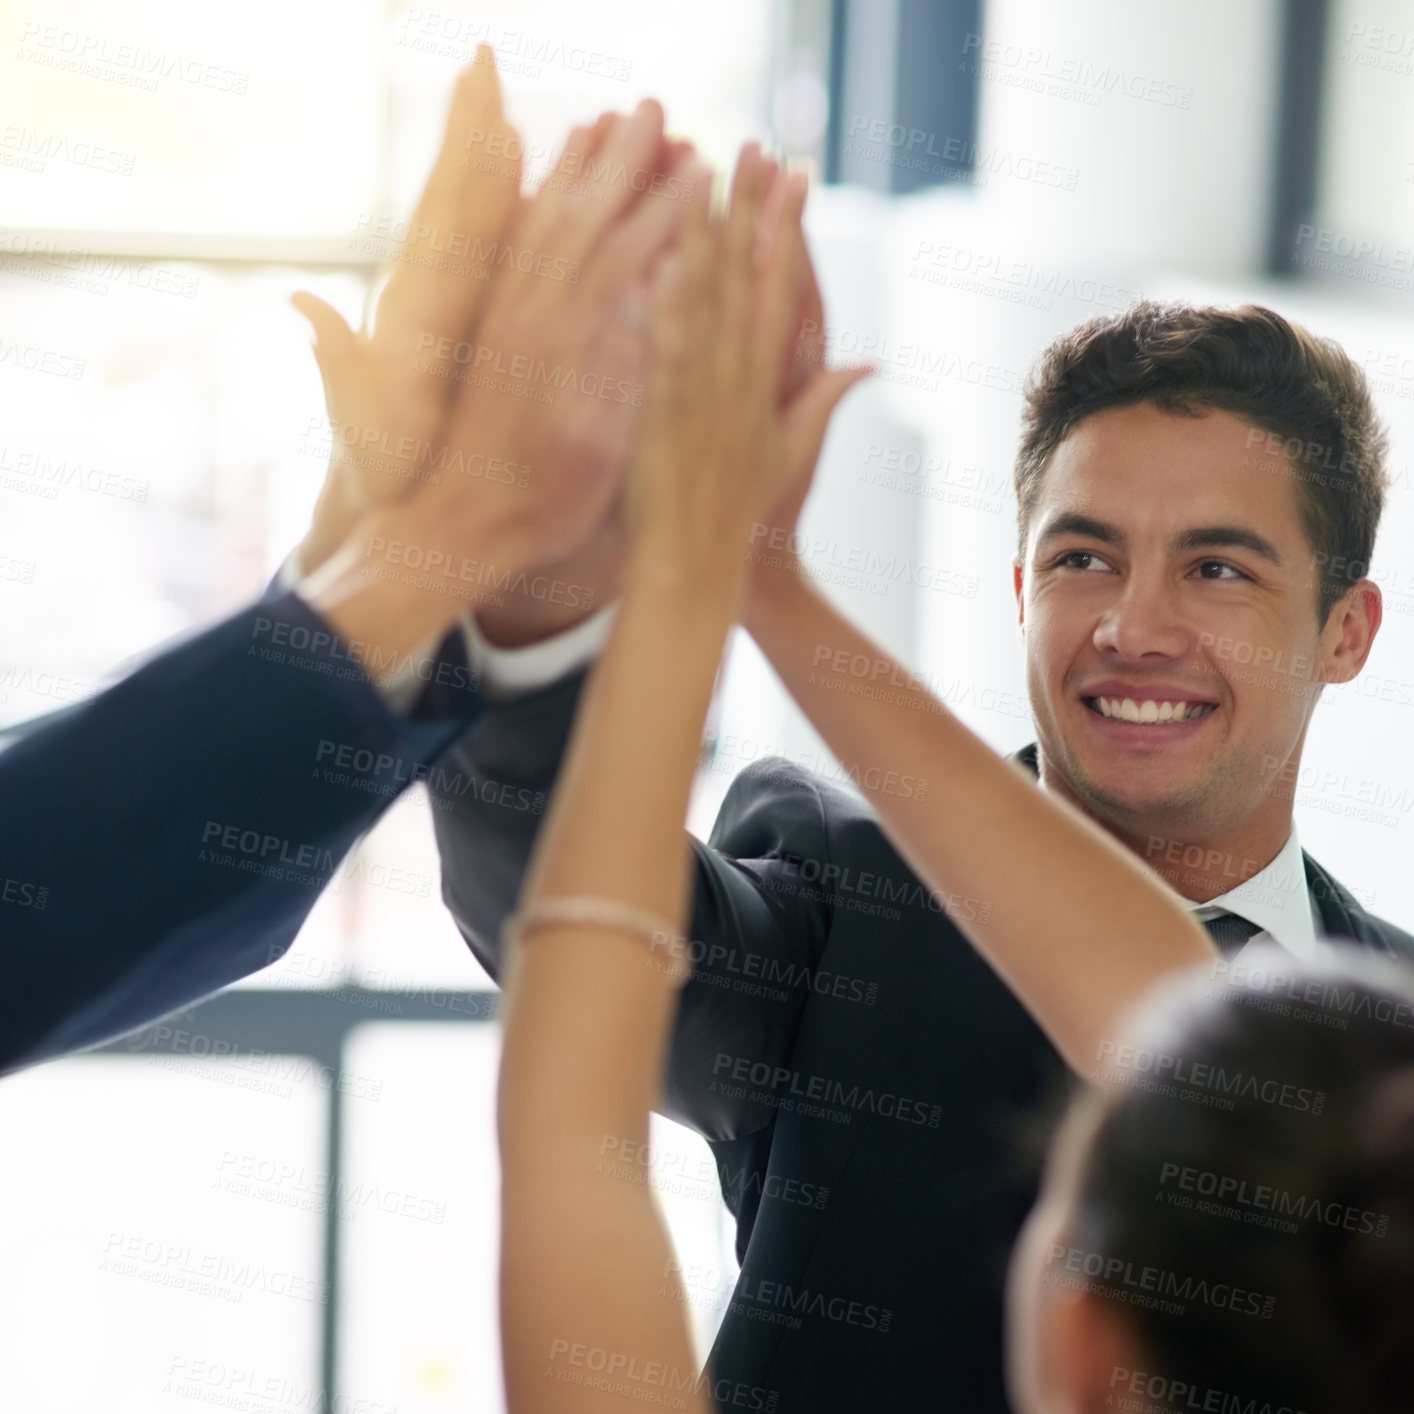 Buy stock photo Hands, teamwork or excited business people high five for mission, collaboration or group support. Goals, victory or happy employees in meeting for sales deal, achievement target or success together